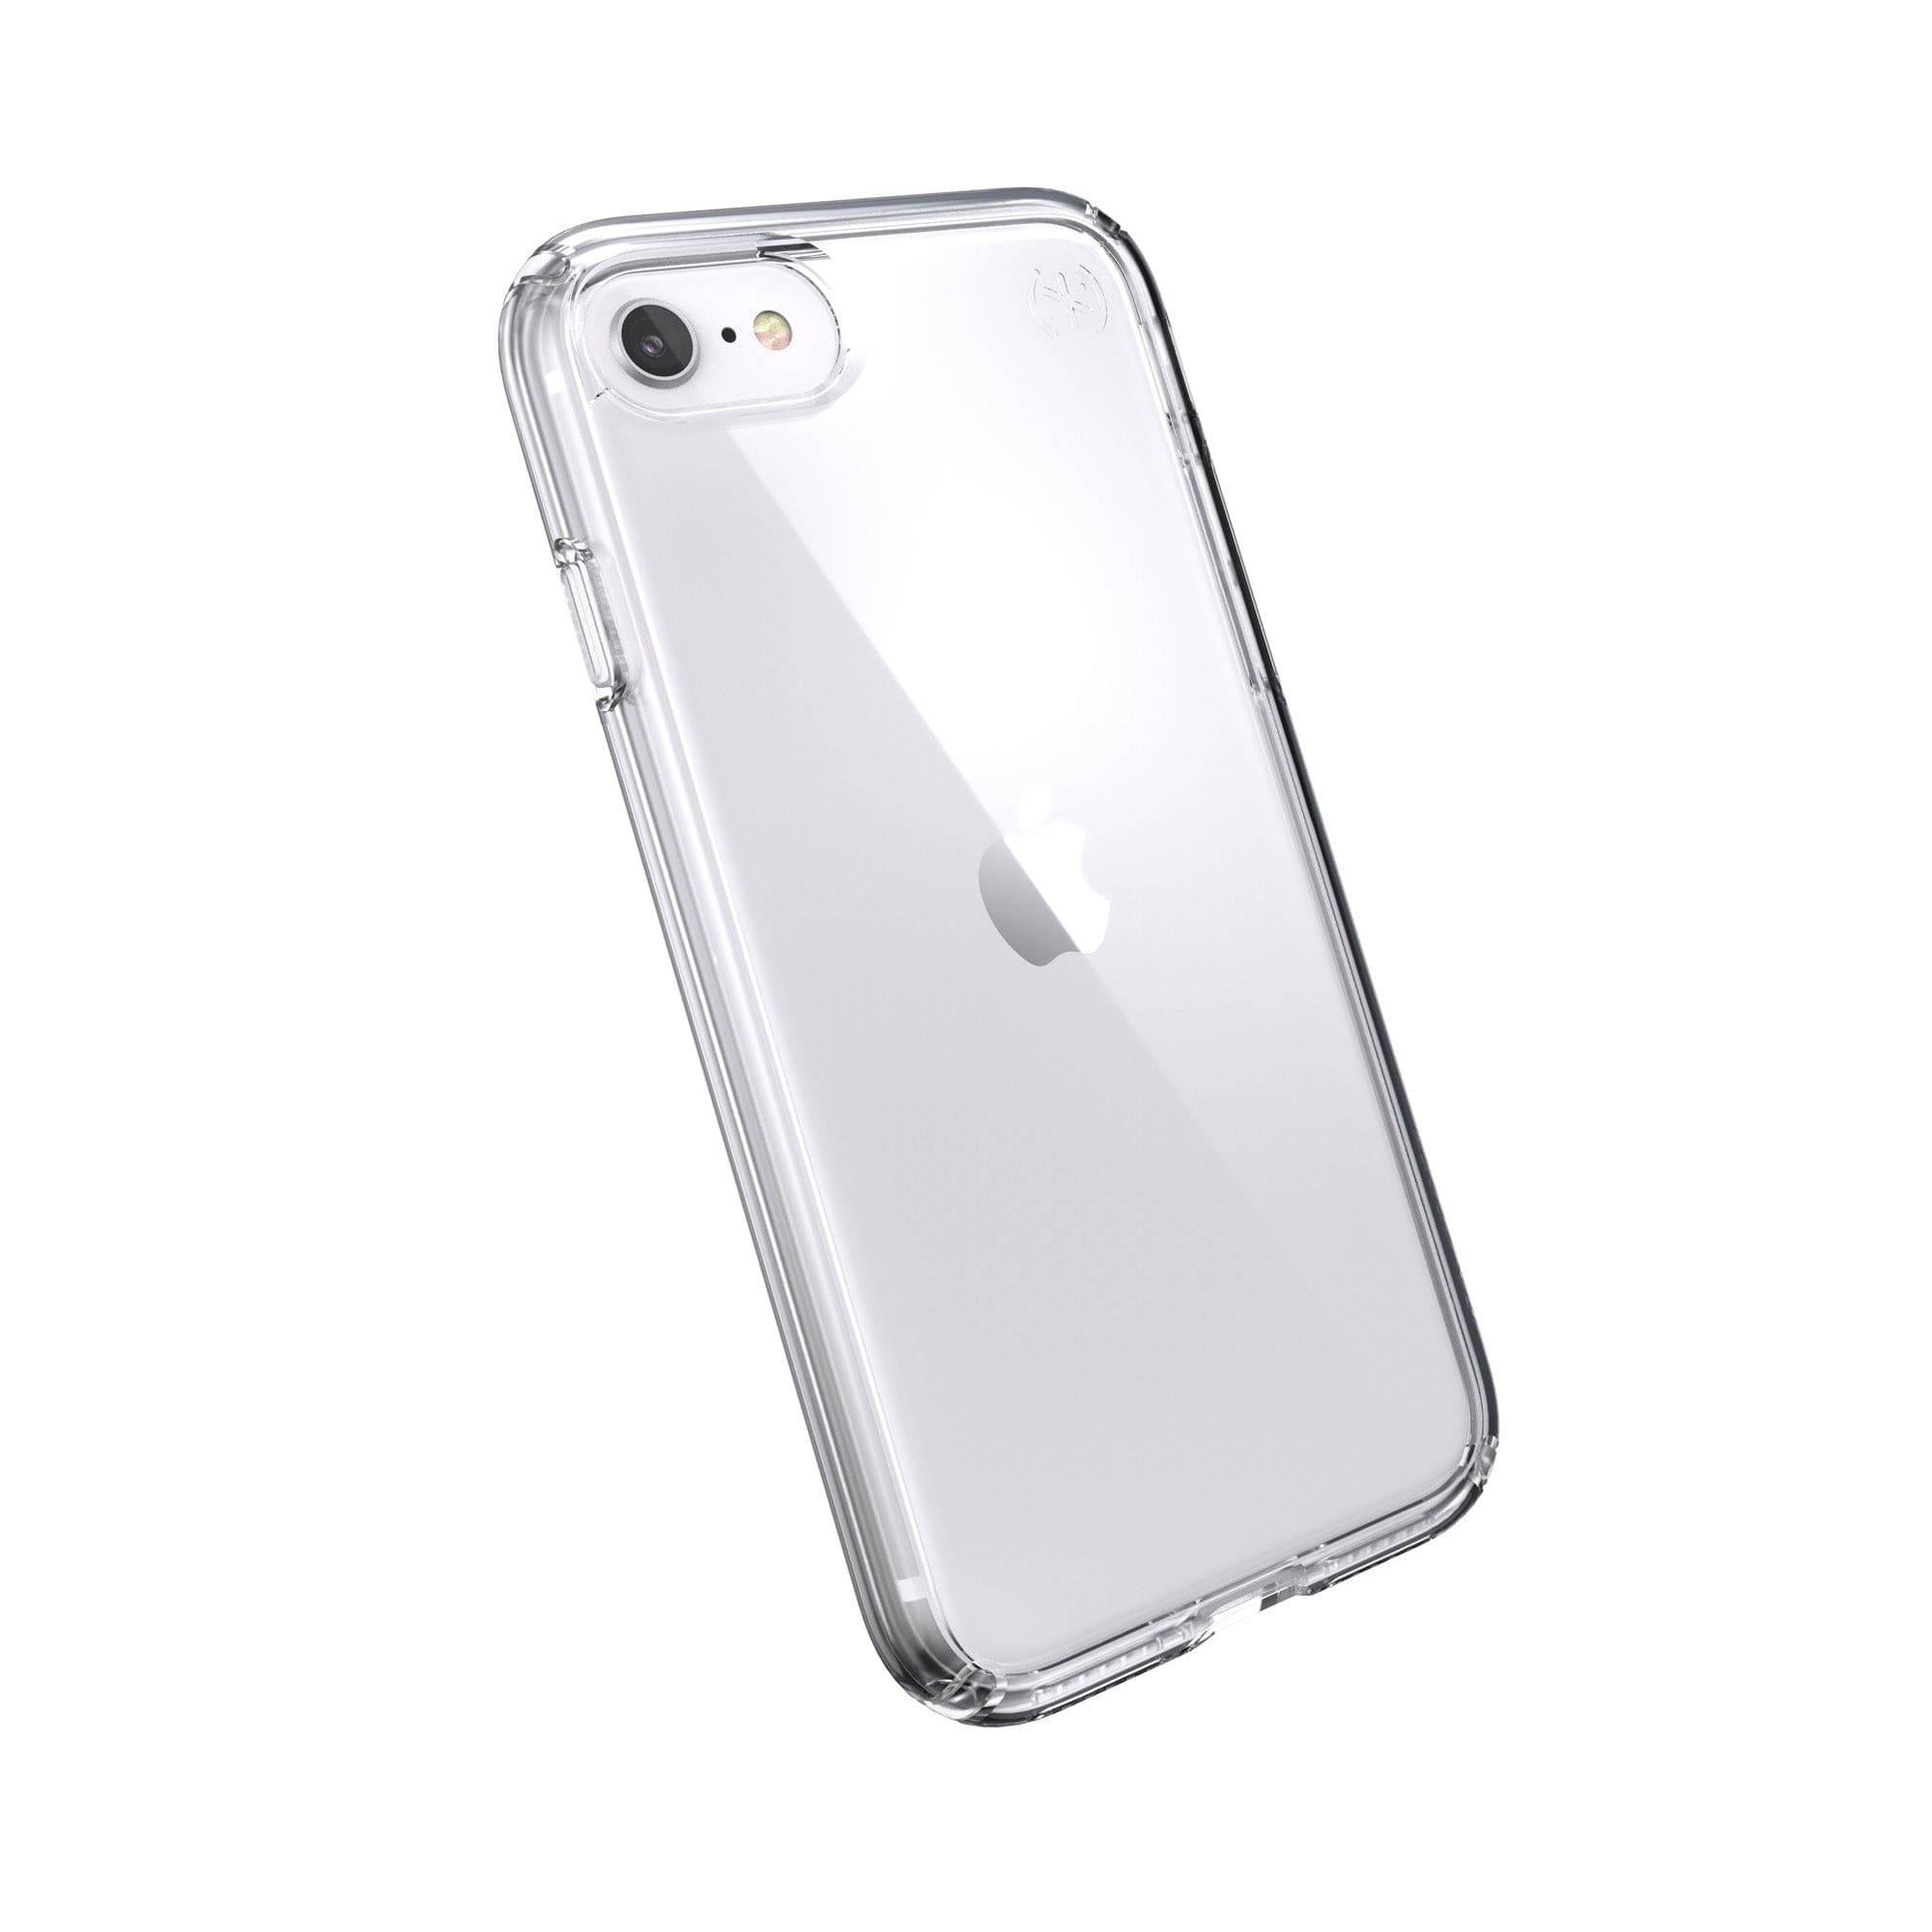 kennis koppeling Arthur Speck Presidio Perfect-Clear iPhone SE (2022/2020) / iPhone 8 Cases Best iPhone  SE (2022/2020) / iPhone 8 - $39.95